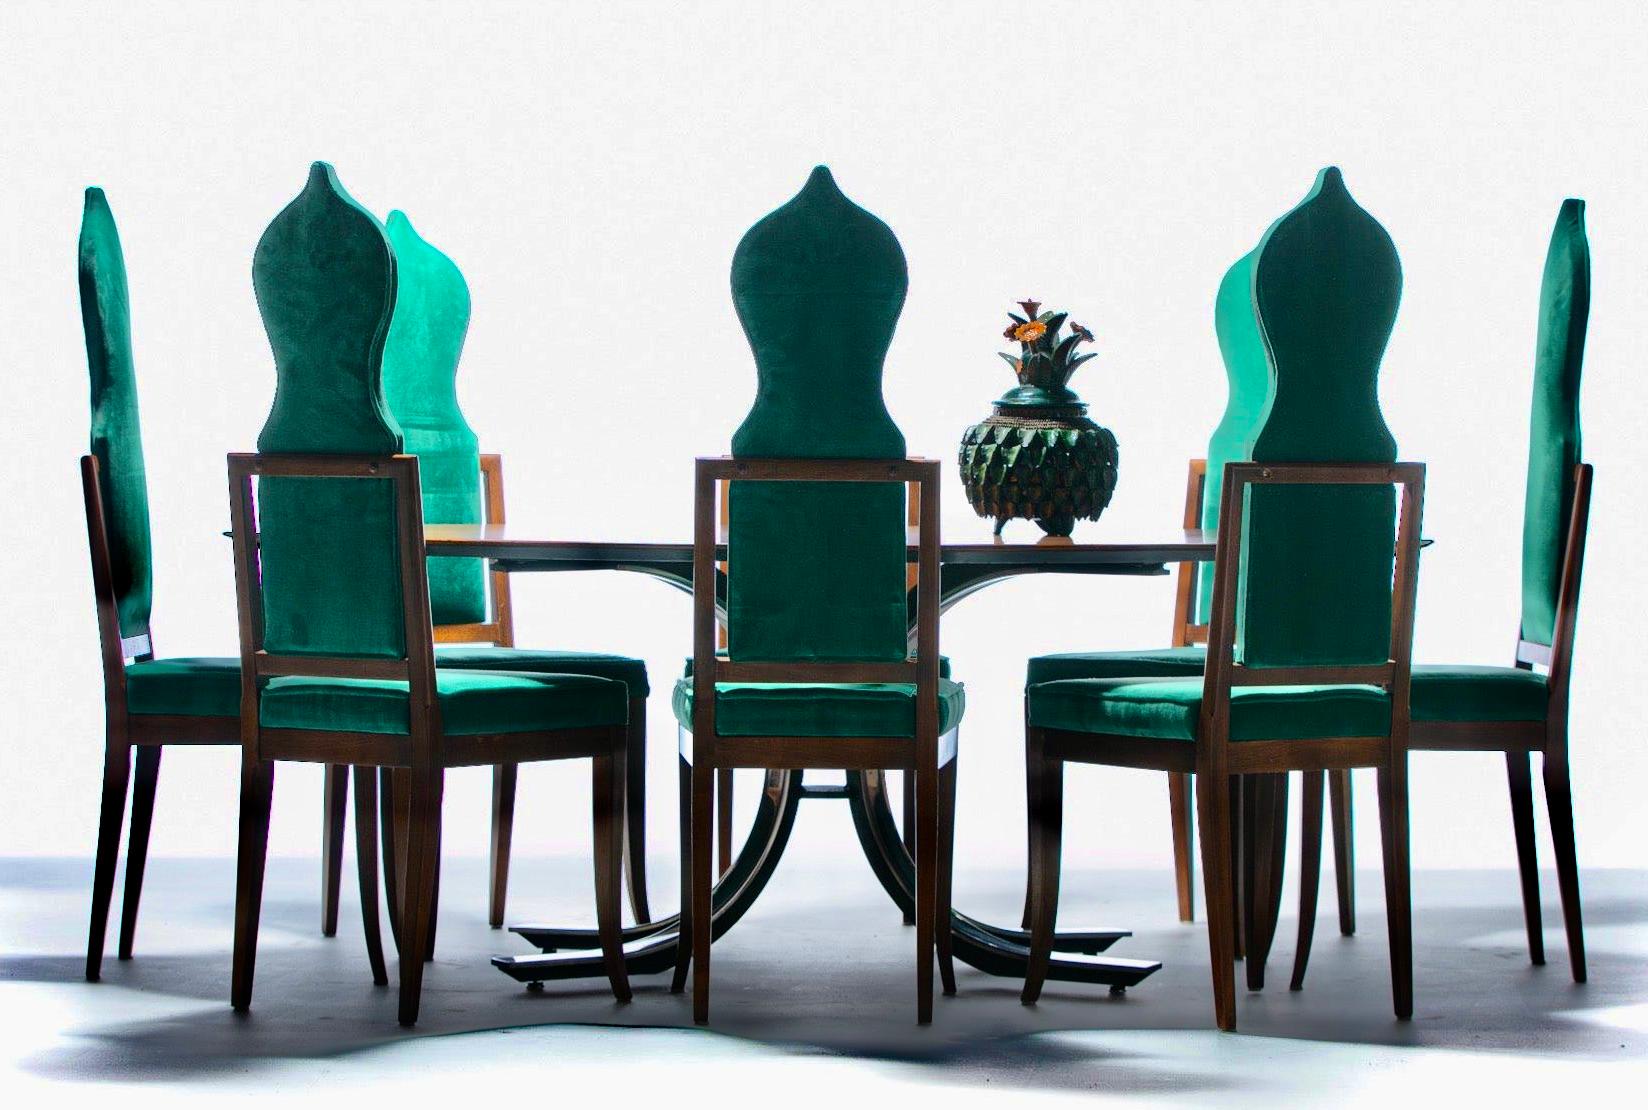 Add up high art and unique sculpture with a sexy Tom Ford dinner party vibe and you get this drop dead gorgeous Set of 14 Tommi Parzinger style Hollywood Regency Walnut Dining Chairs upholstered in soft Emerald Green Velvet. The profile of this